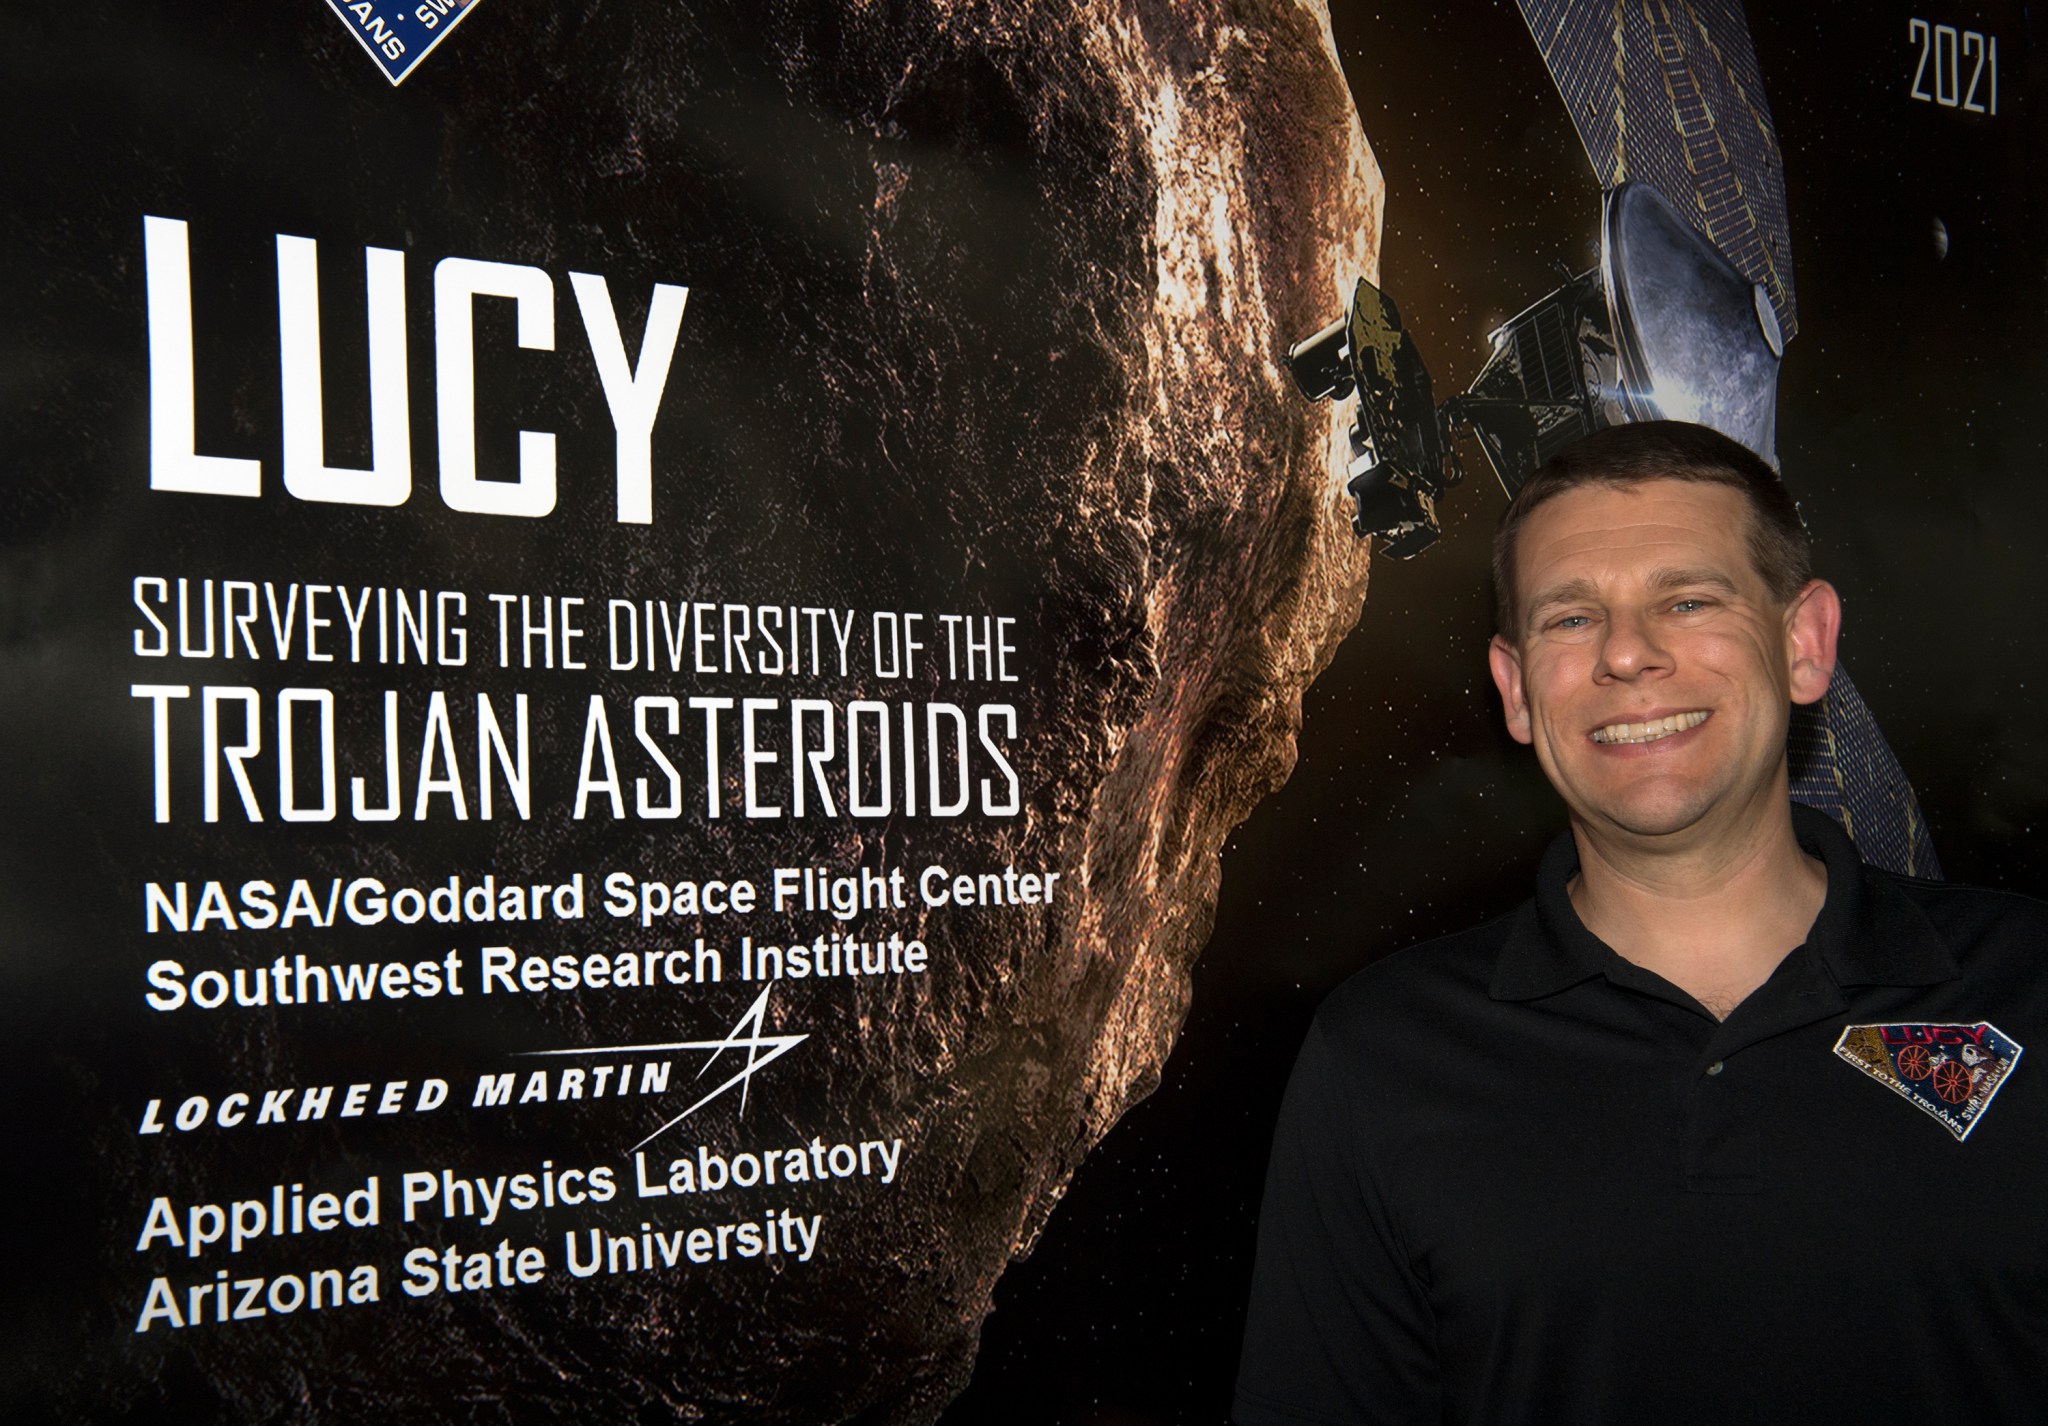 Man with brown hair and fair skin stands smiling next to a poster for the Lucy mission